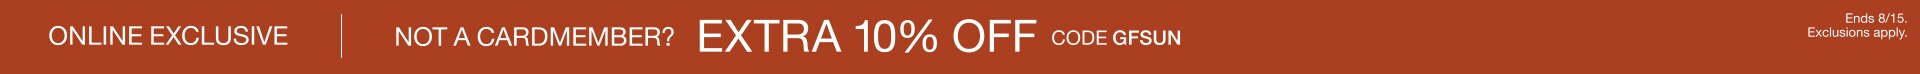 Cardmembers Extra 15% off + Nonmembers Extra 10% off